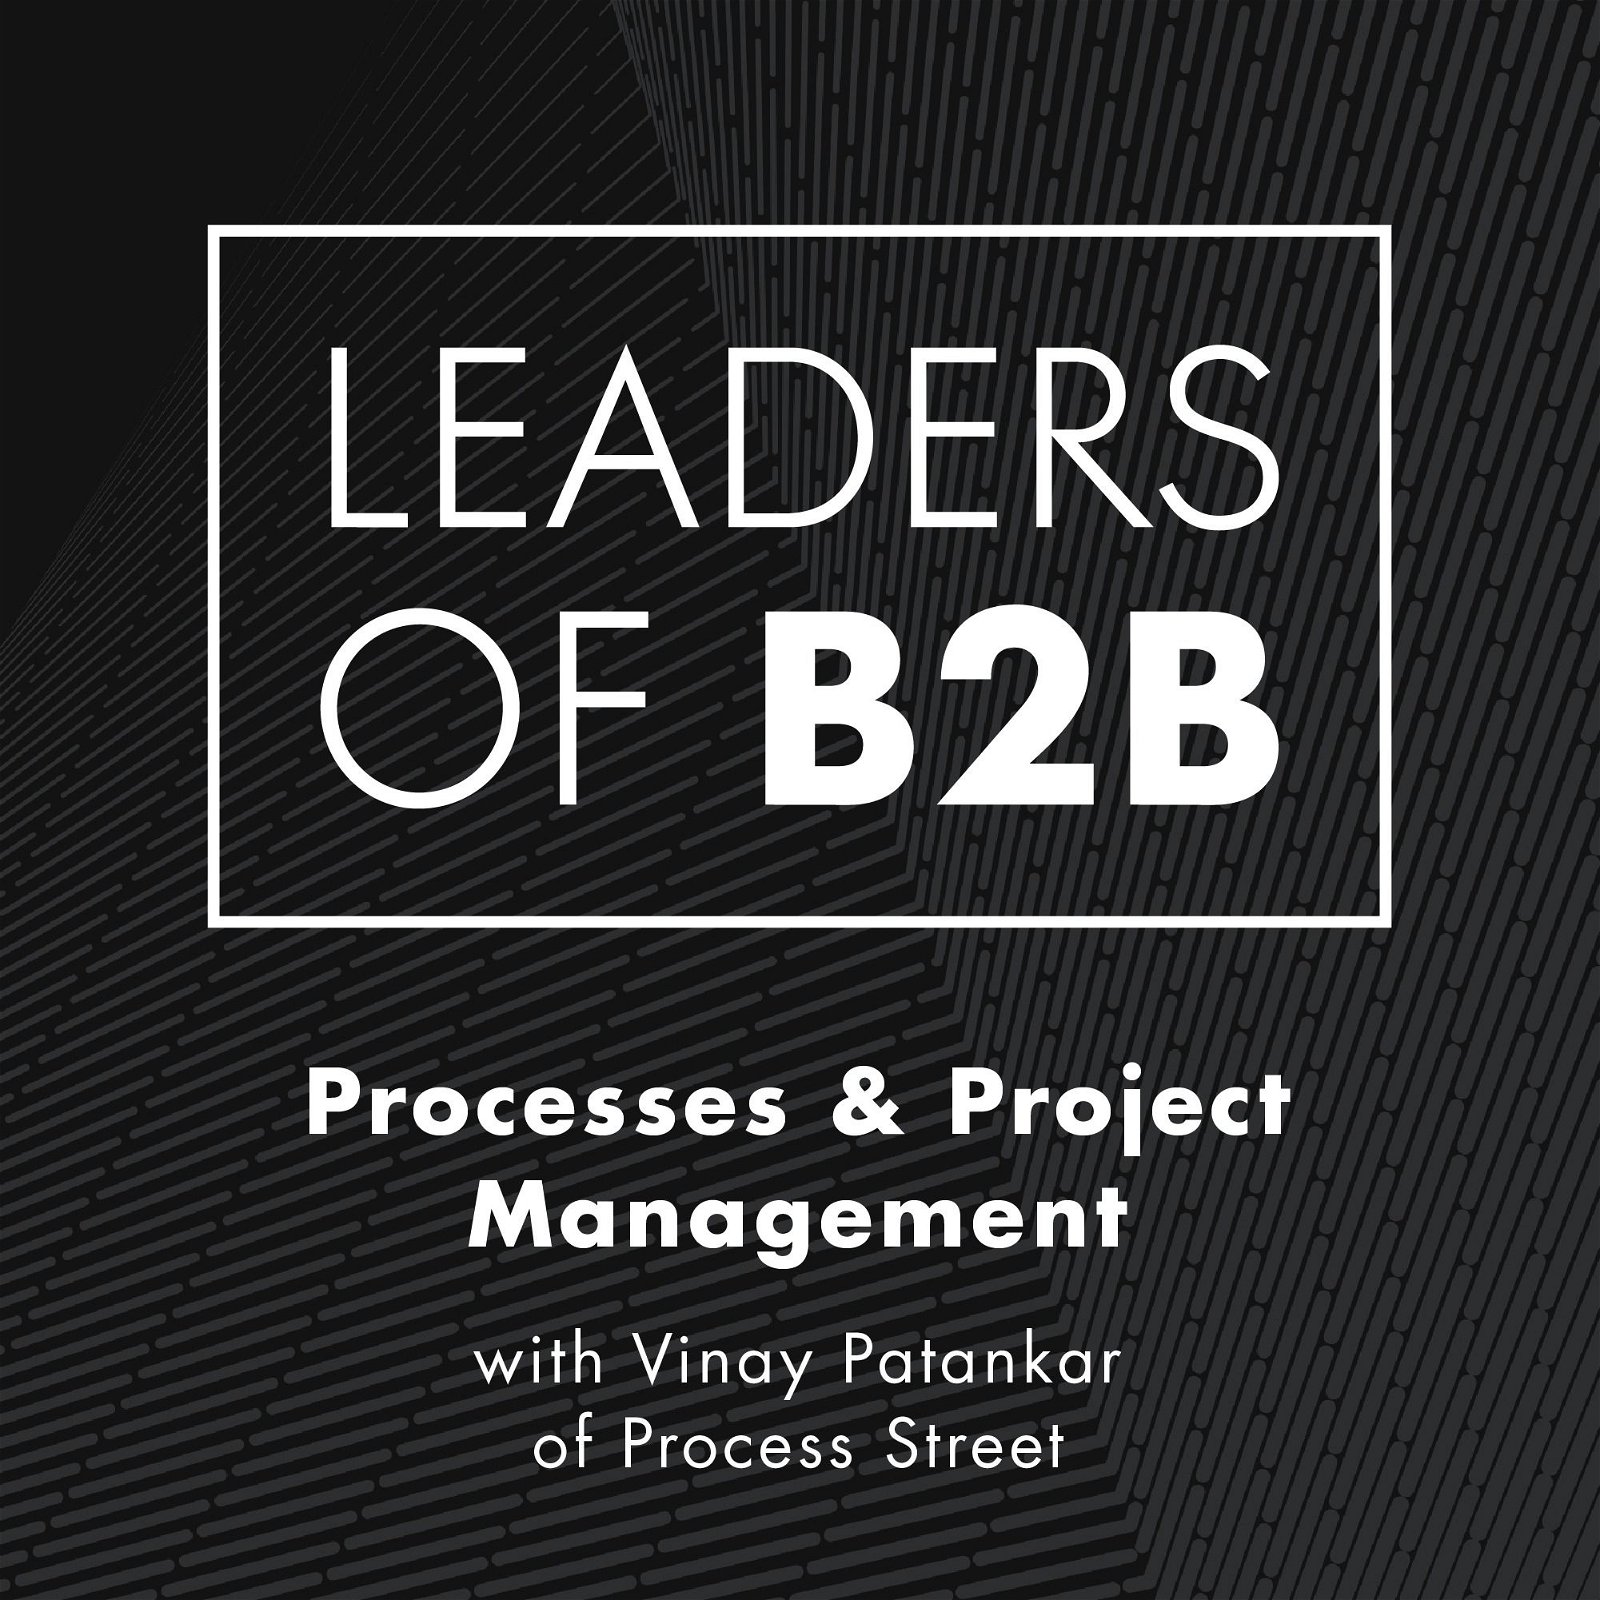 Processes & Project Management with Vinay Patankar of Process Street